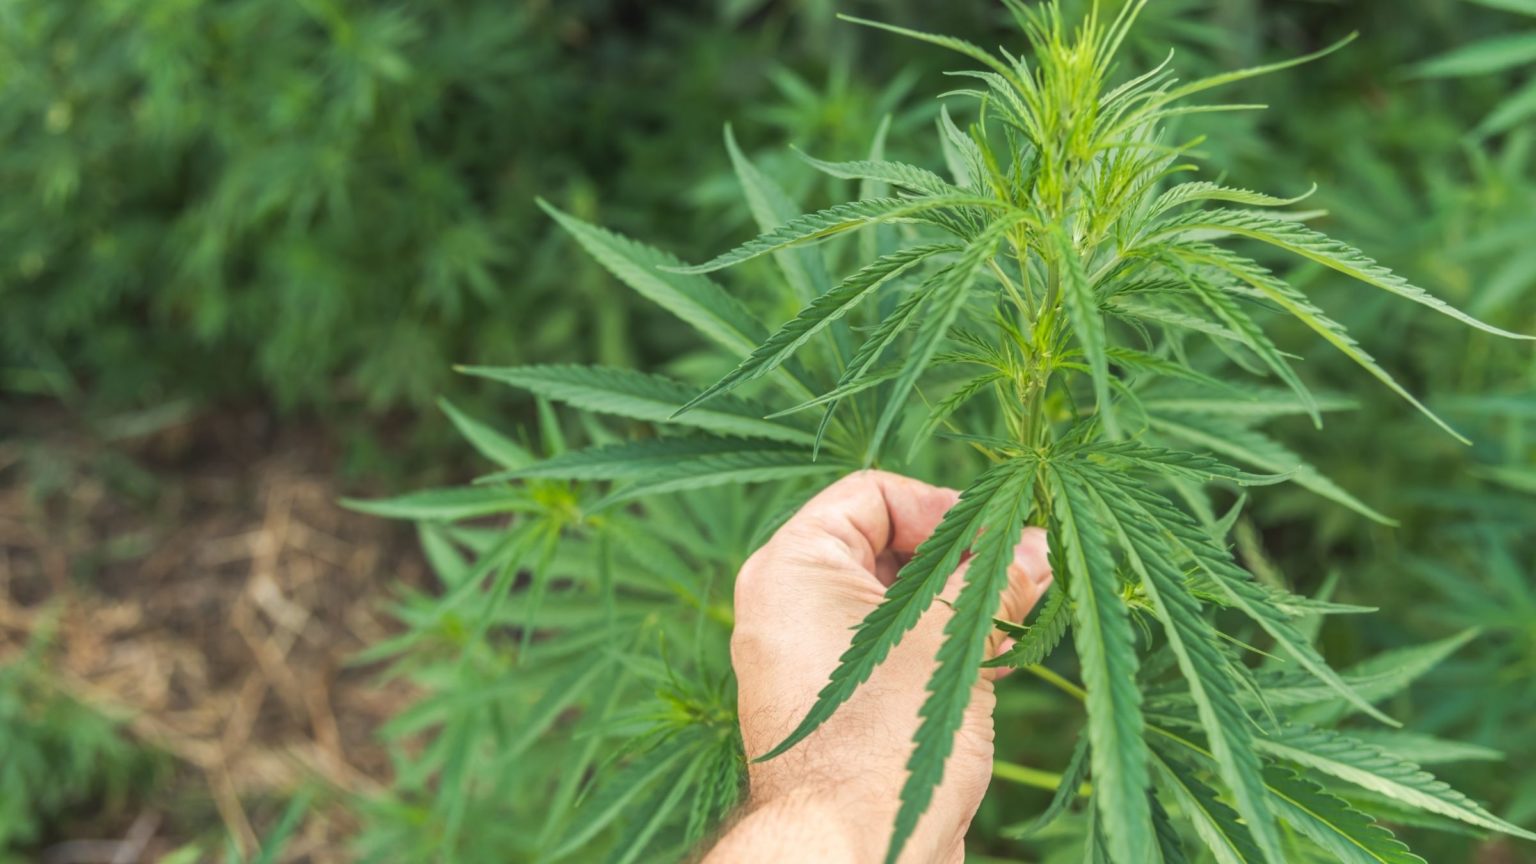 how to grow weed outdoors